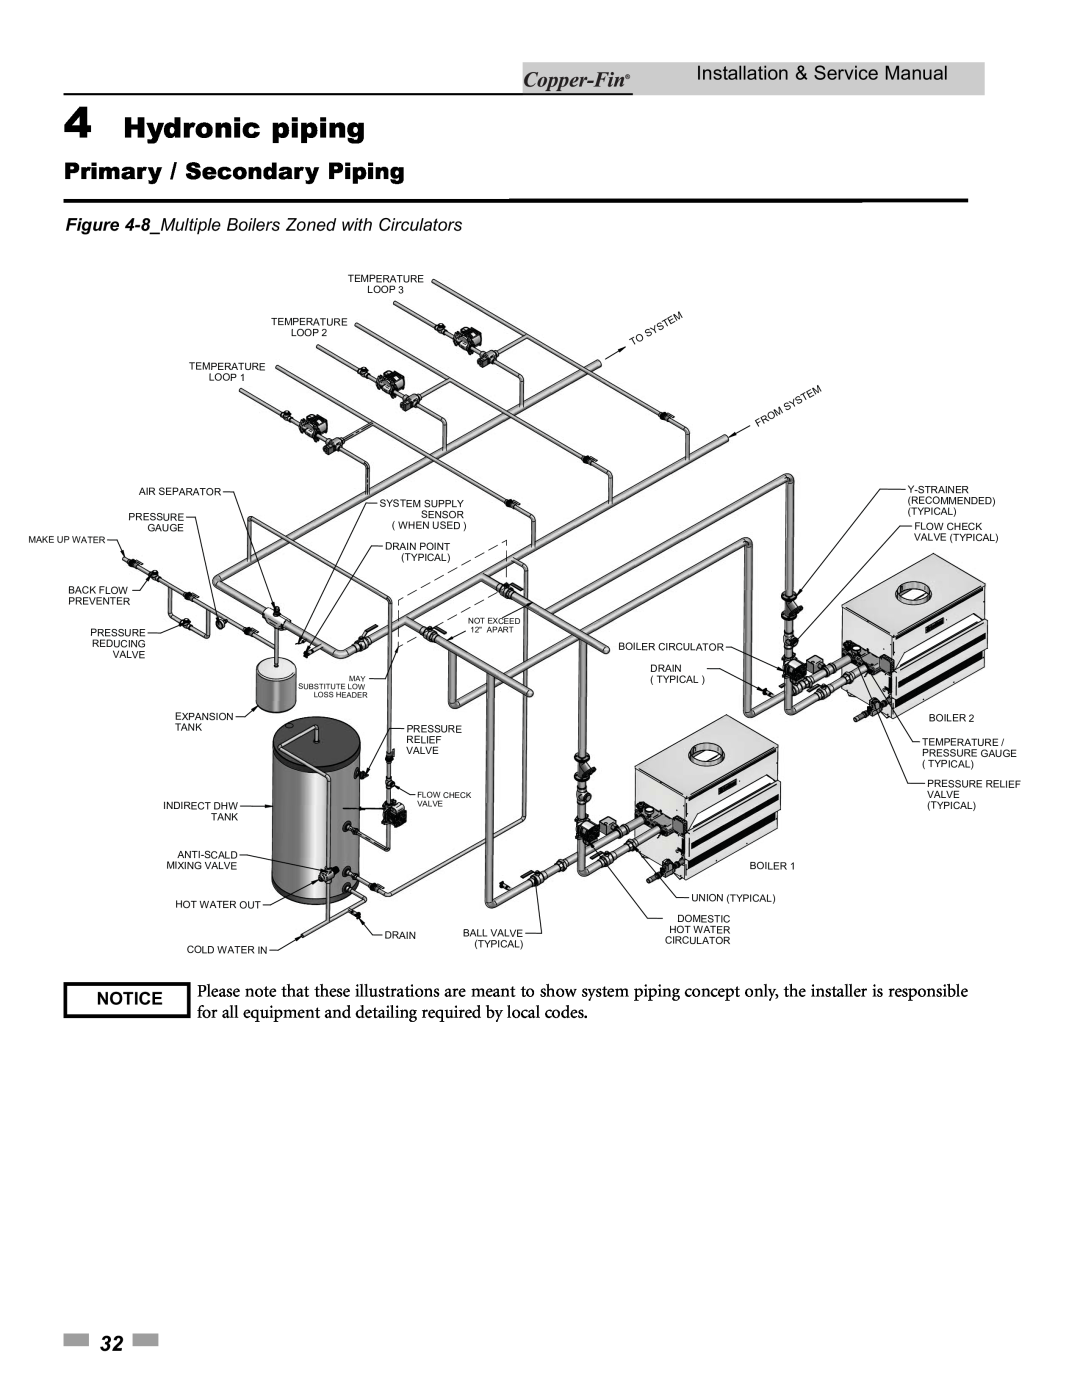 Lochinvar 500 4Hydronic piping, Primary / Secondary Piping, Installation & Service Manual, Loop Air Separator, Y-Strainer 